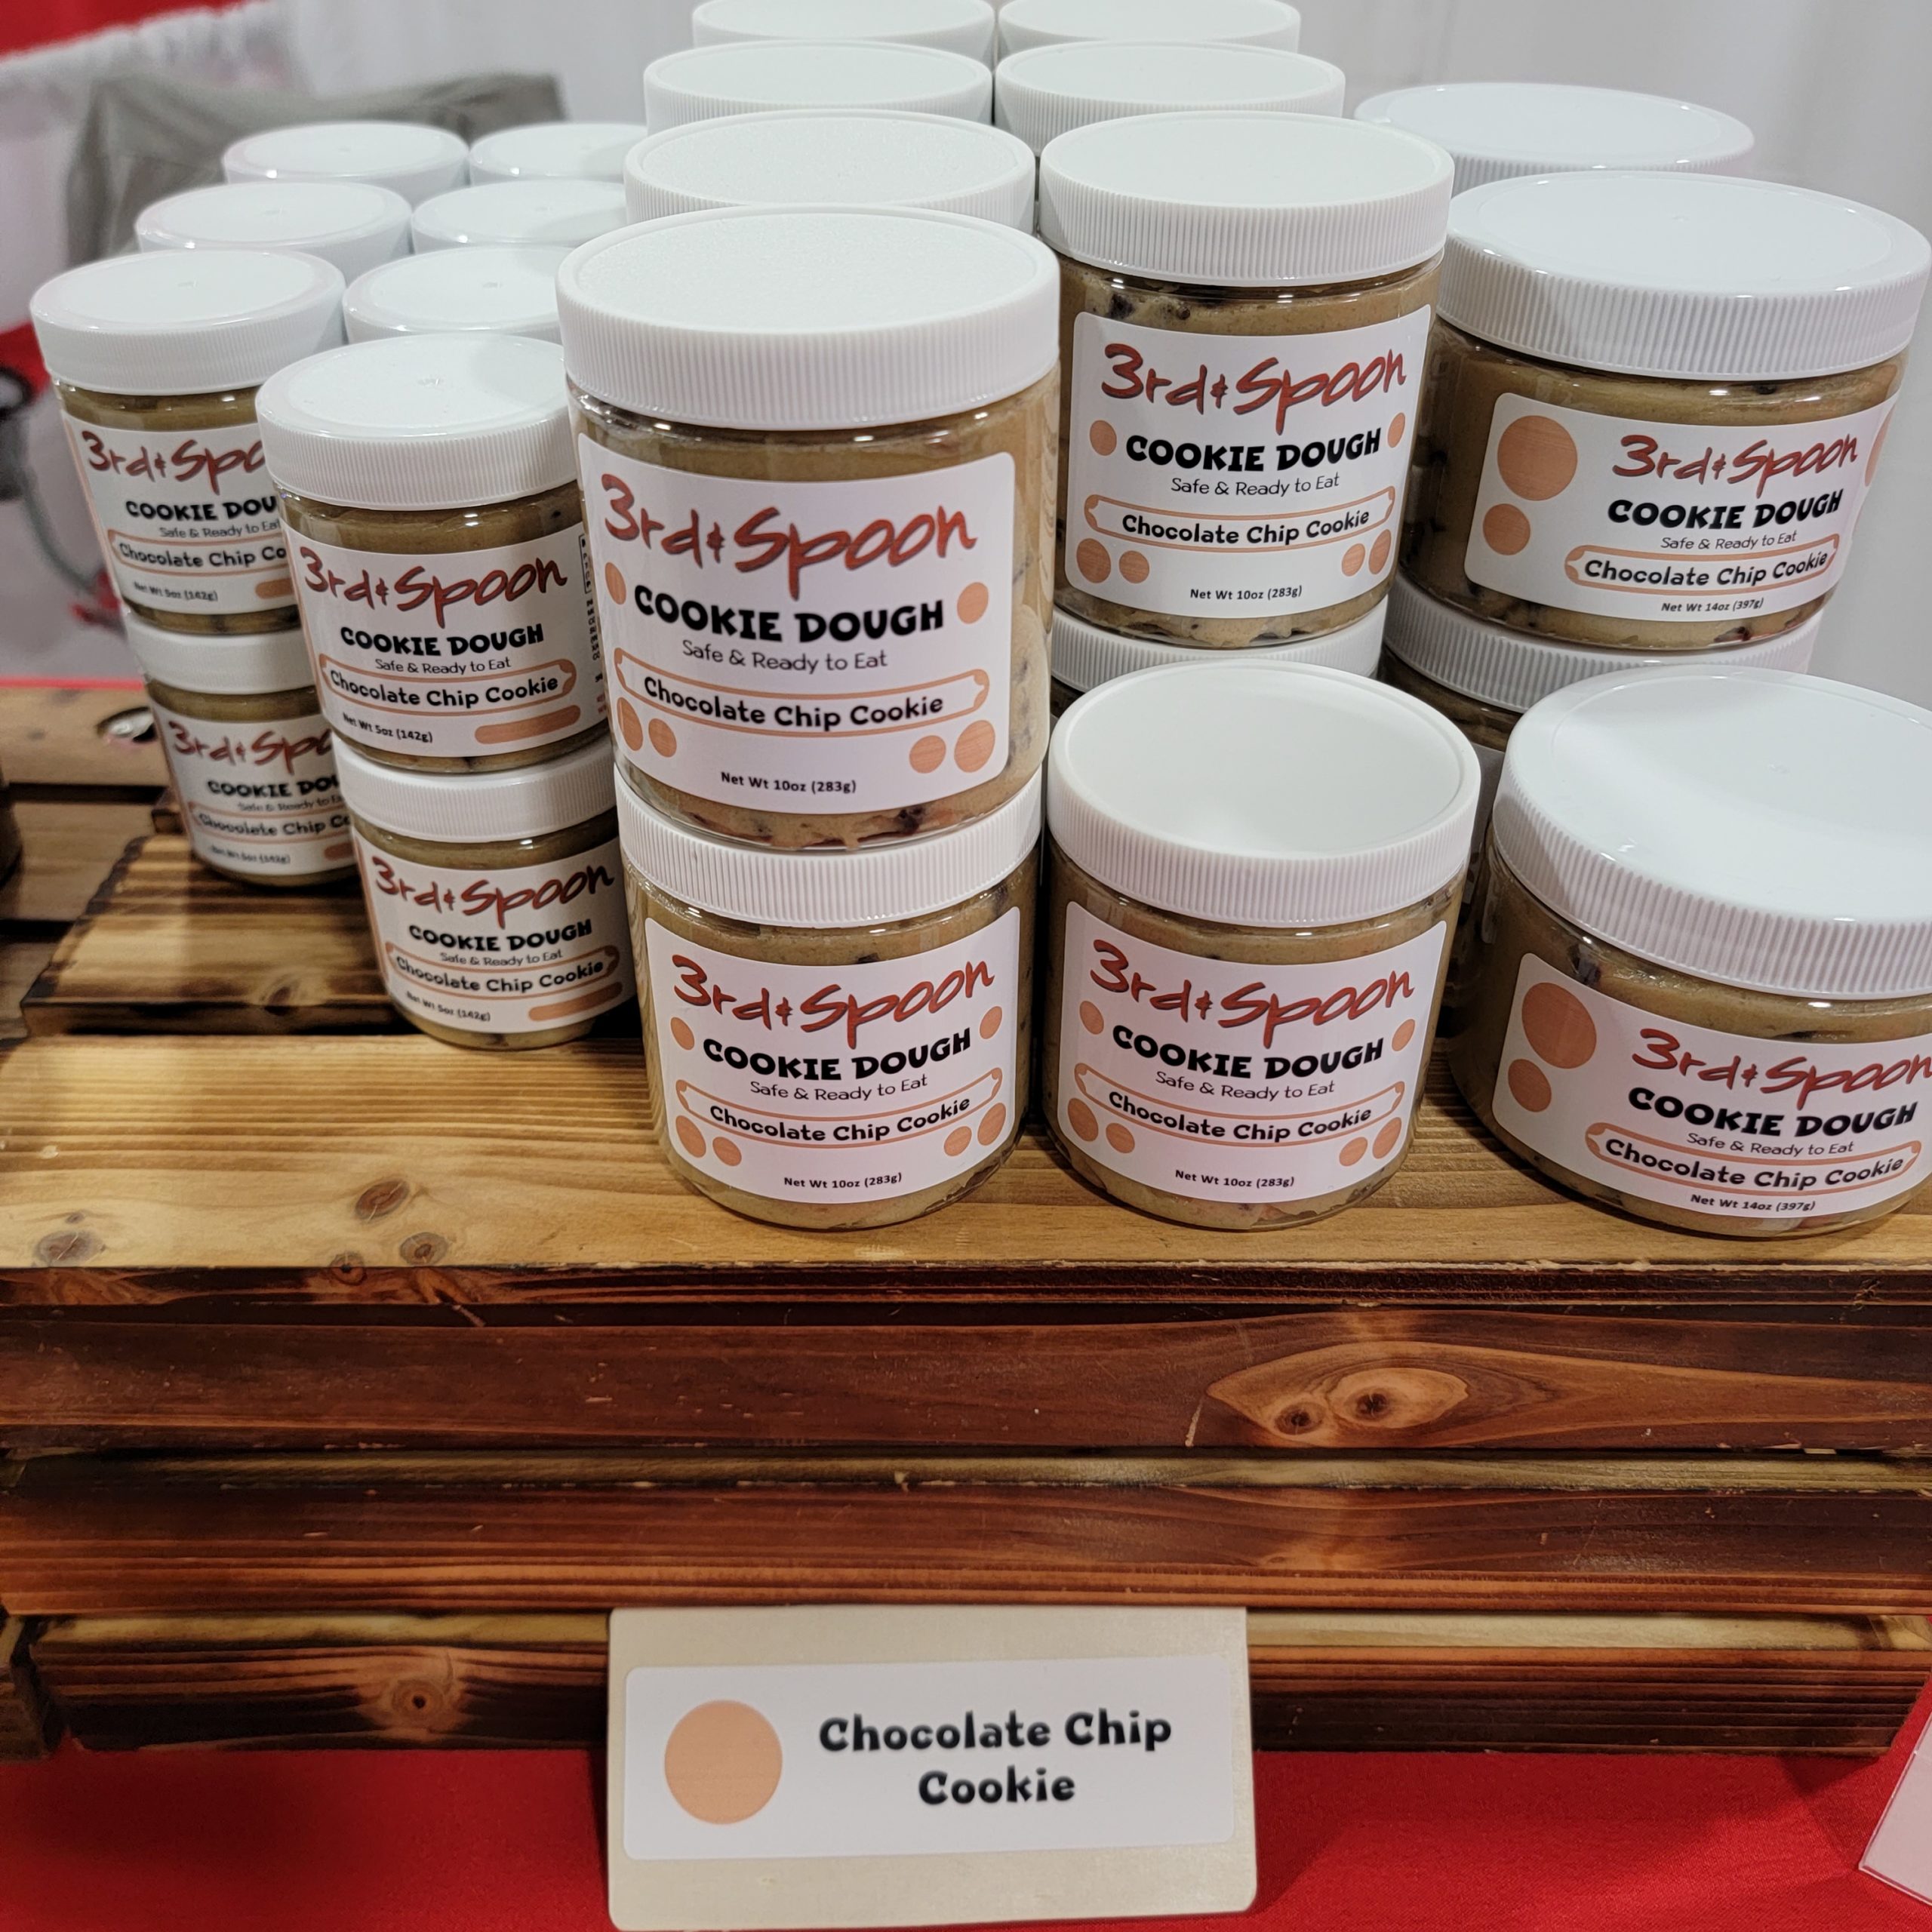 https://www.3rdspoon.com/wp-content/uploads/2023/03/Chocolate-Chip-Cookie-Dough-Display-scaled.jpg